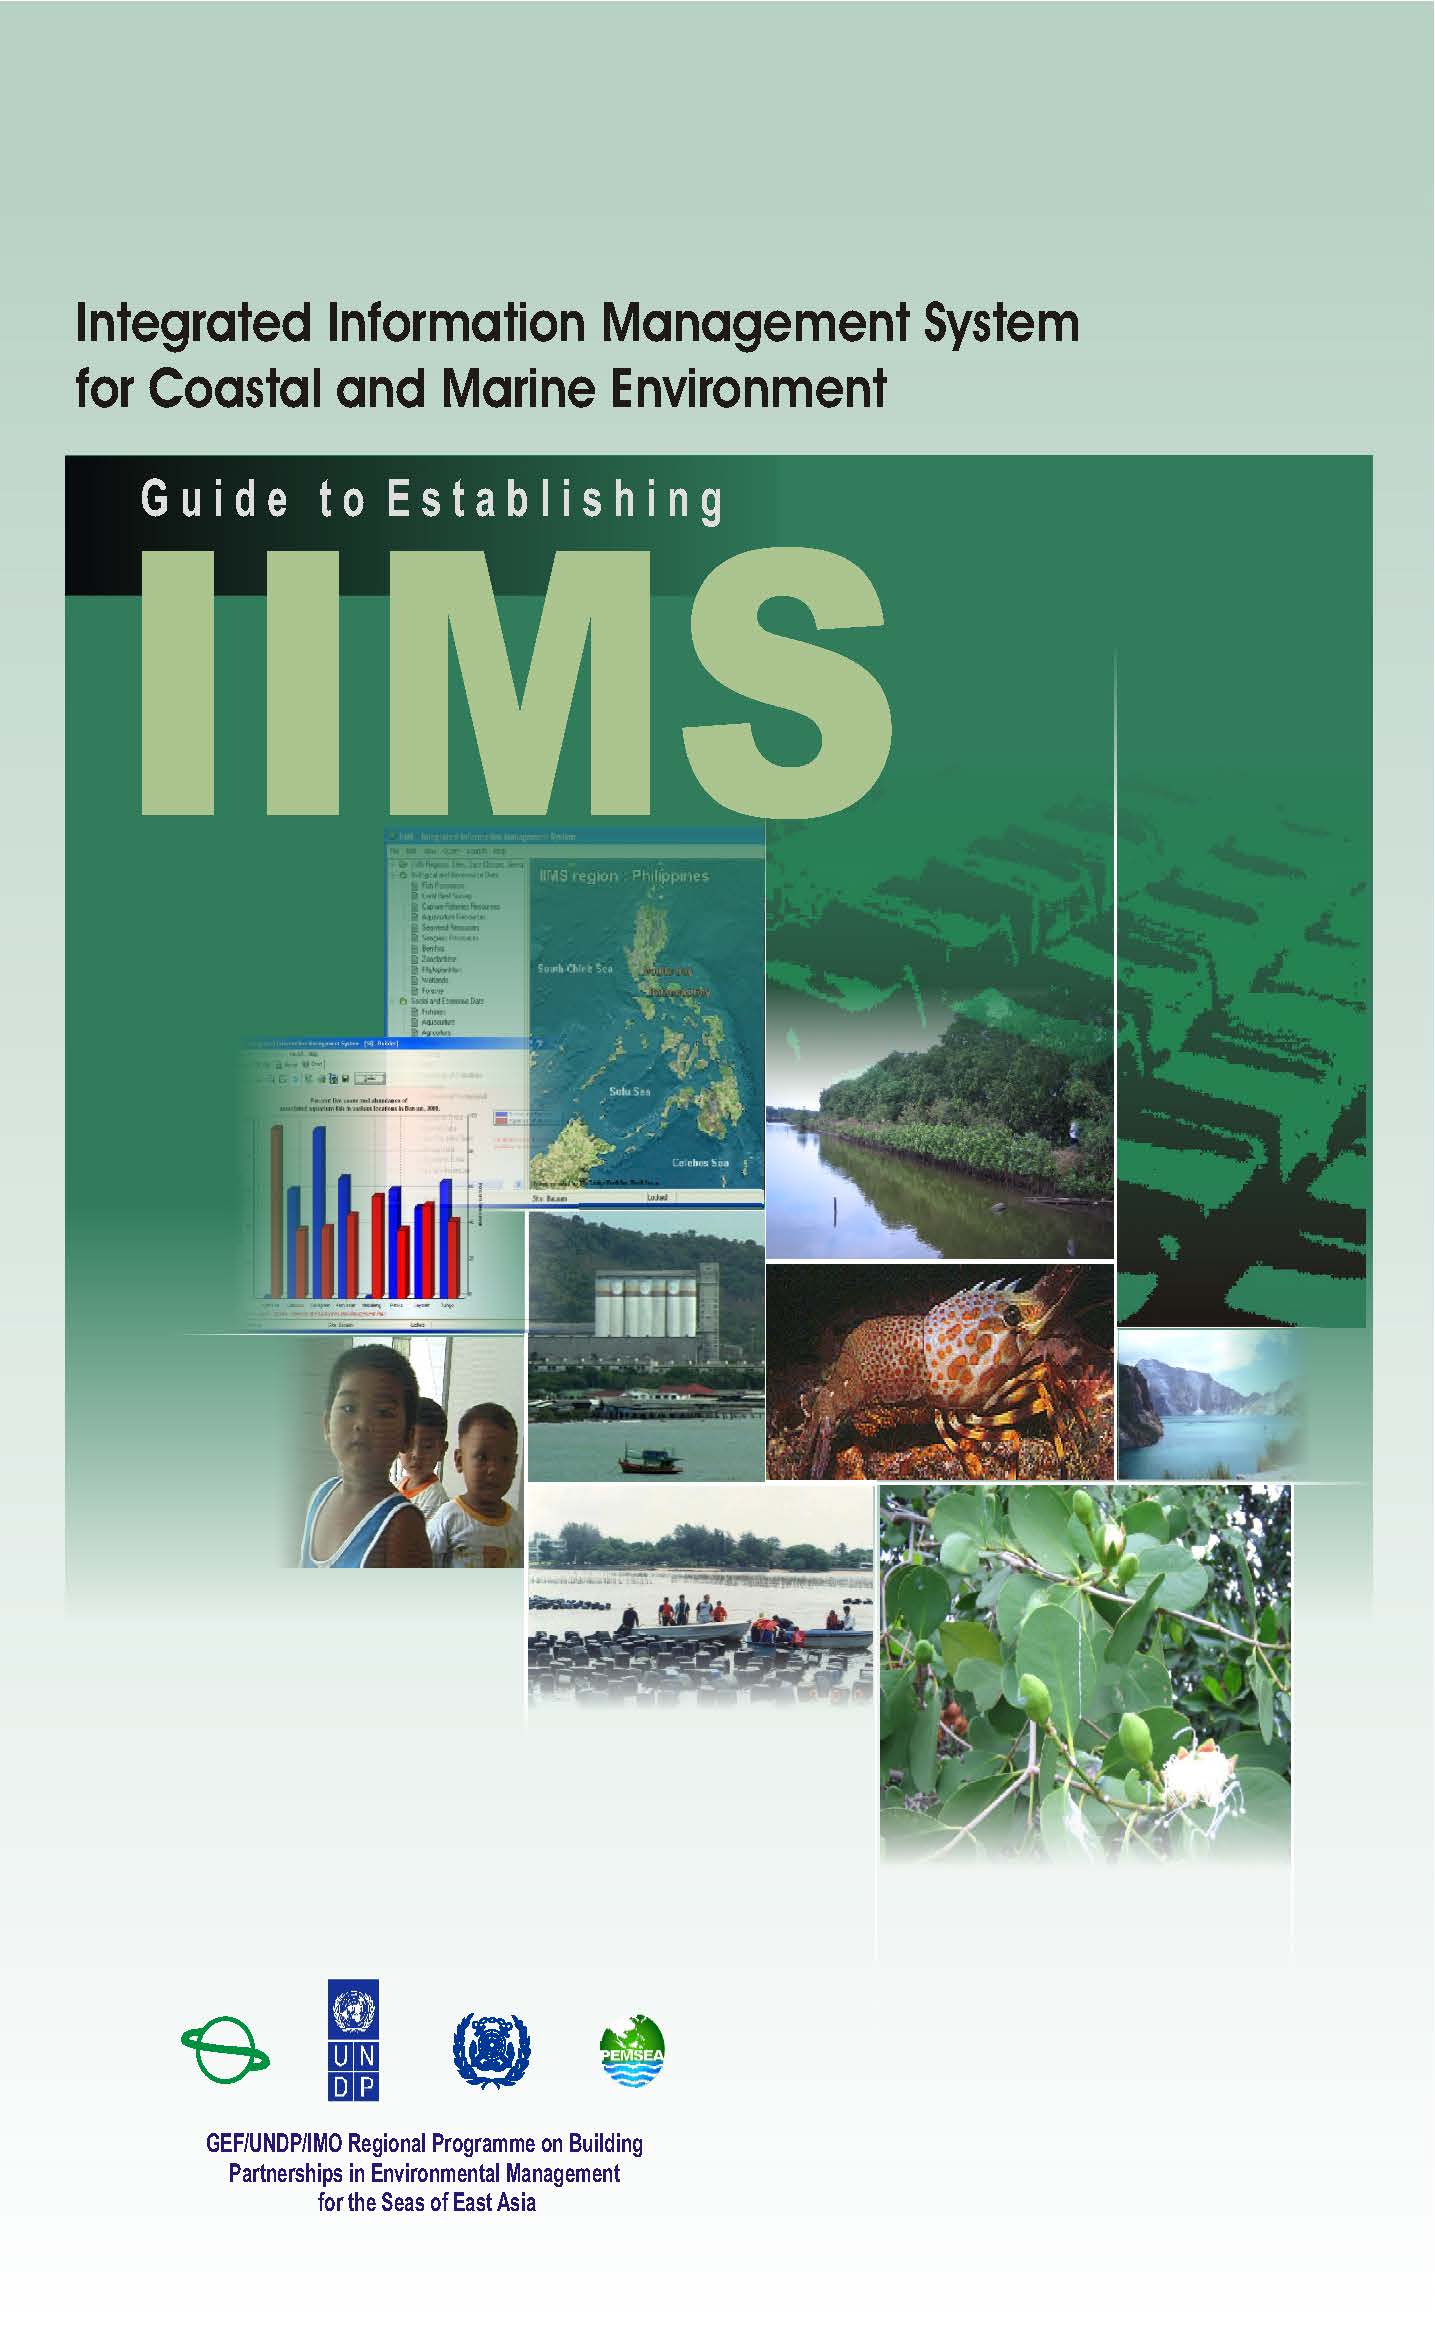 Integrated Information Management System for coastal and marine environment Guide to establishing IIMS